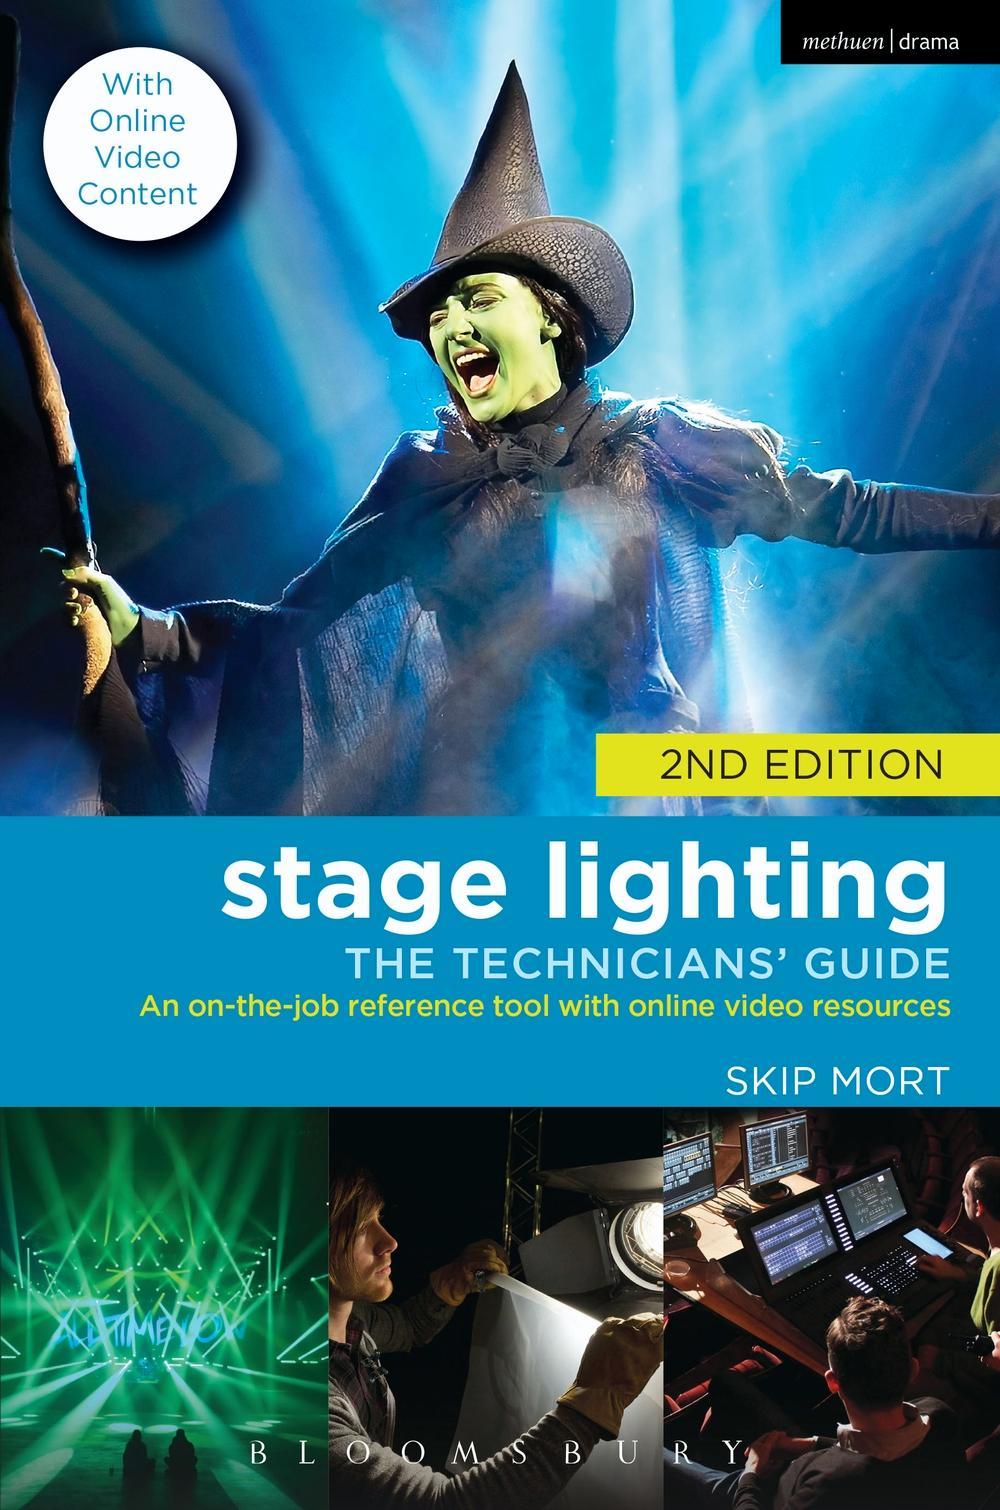 Stage Lighting: The Technicians' Guide - Skip Mort